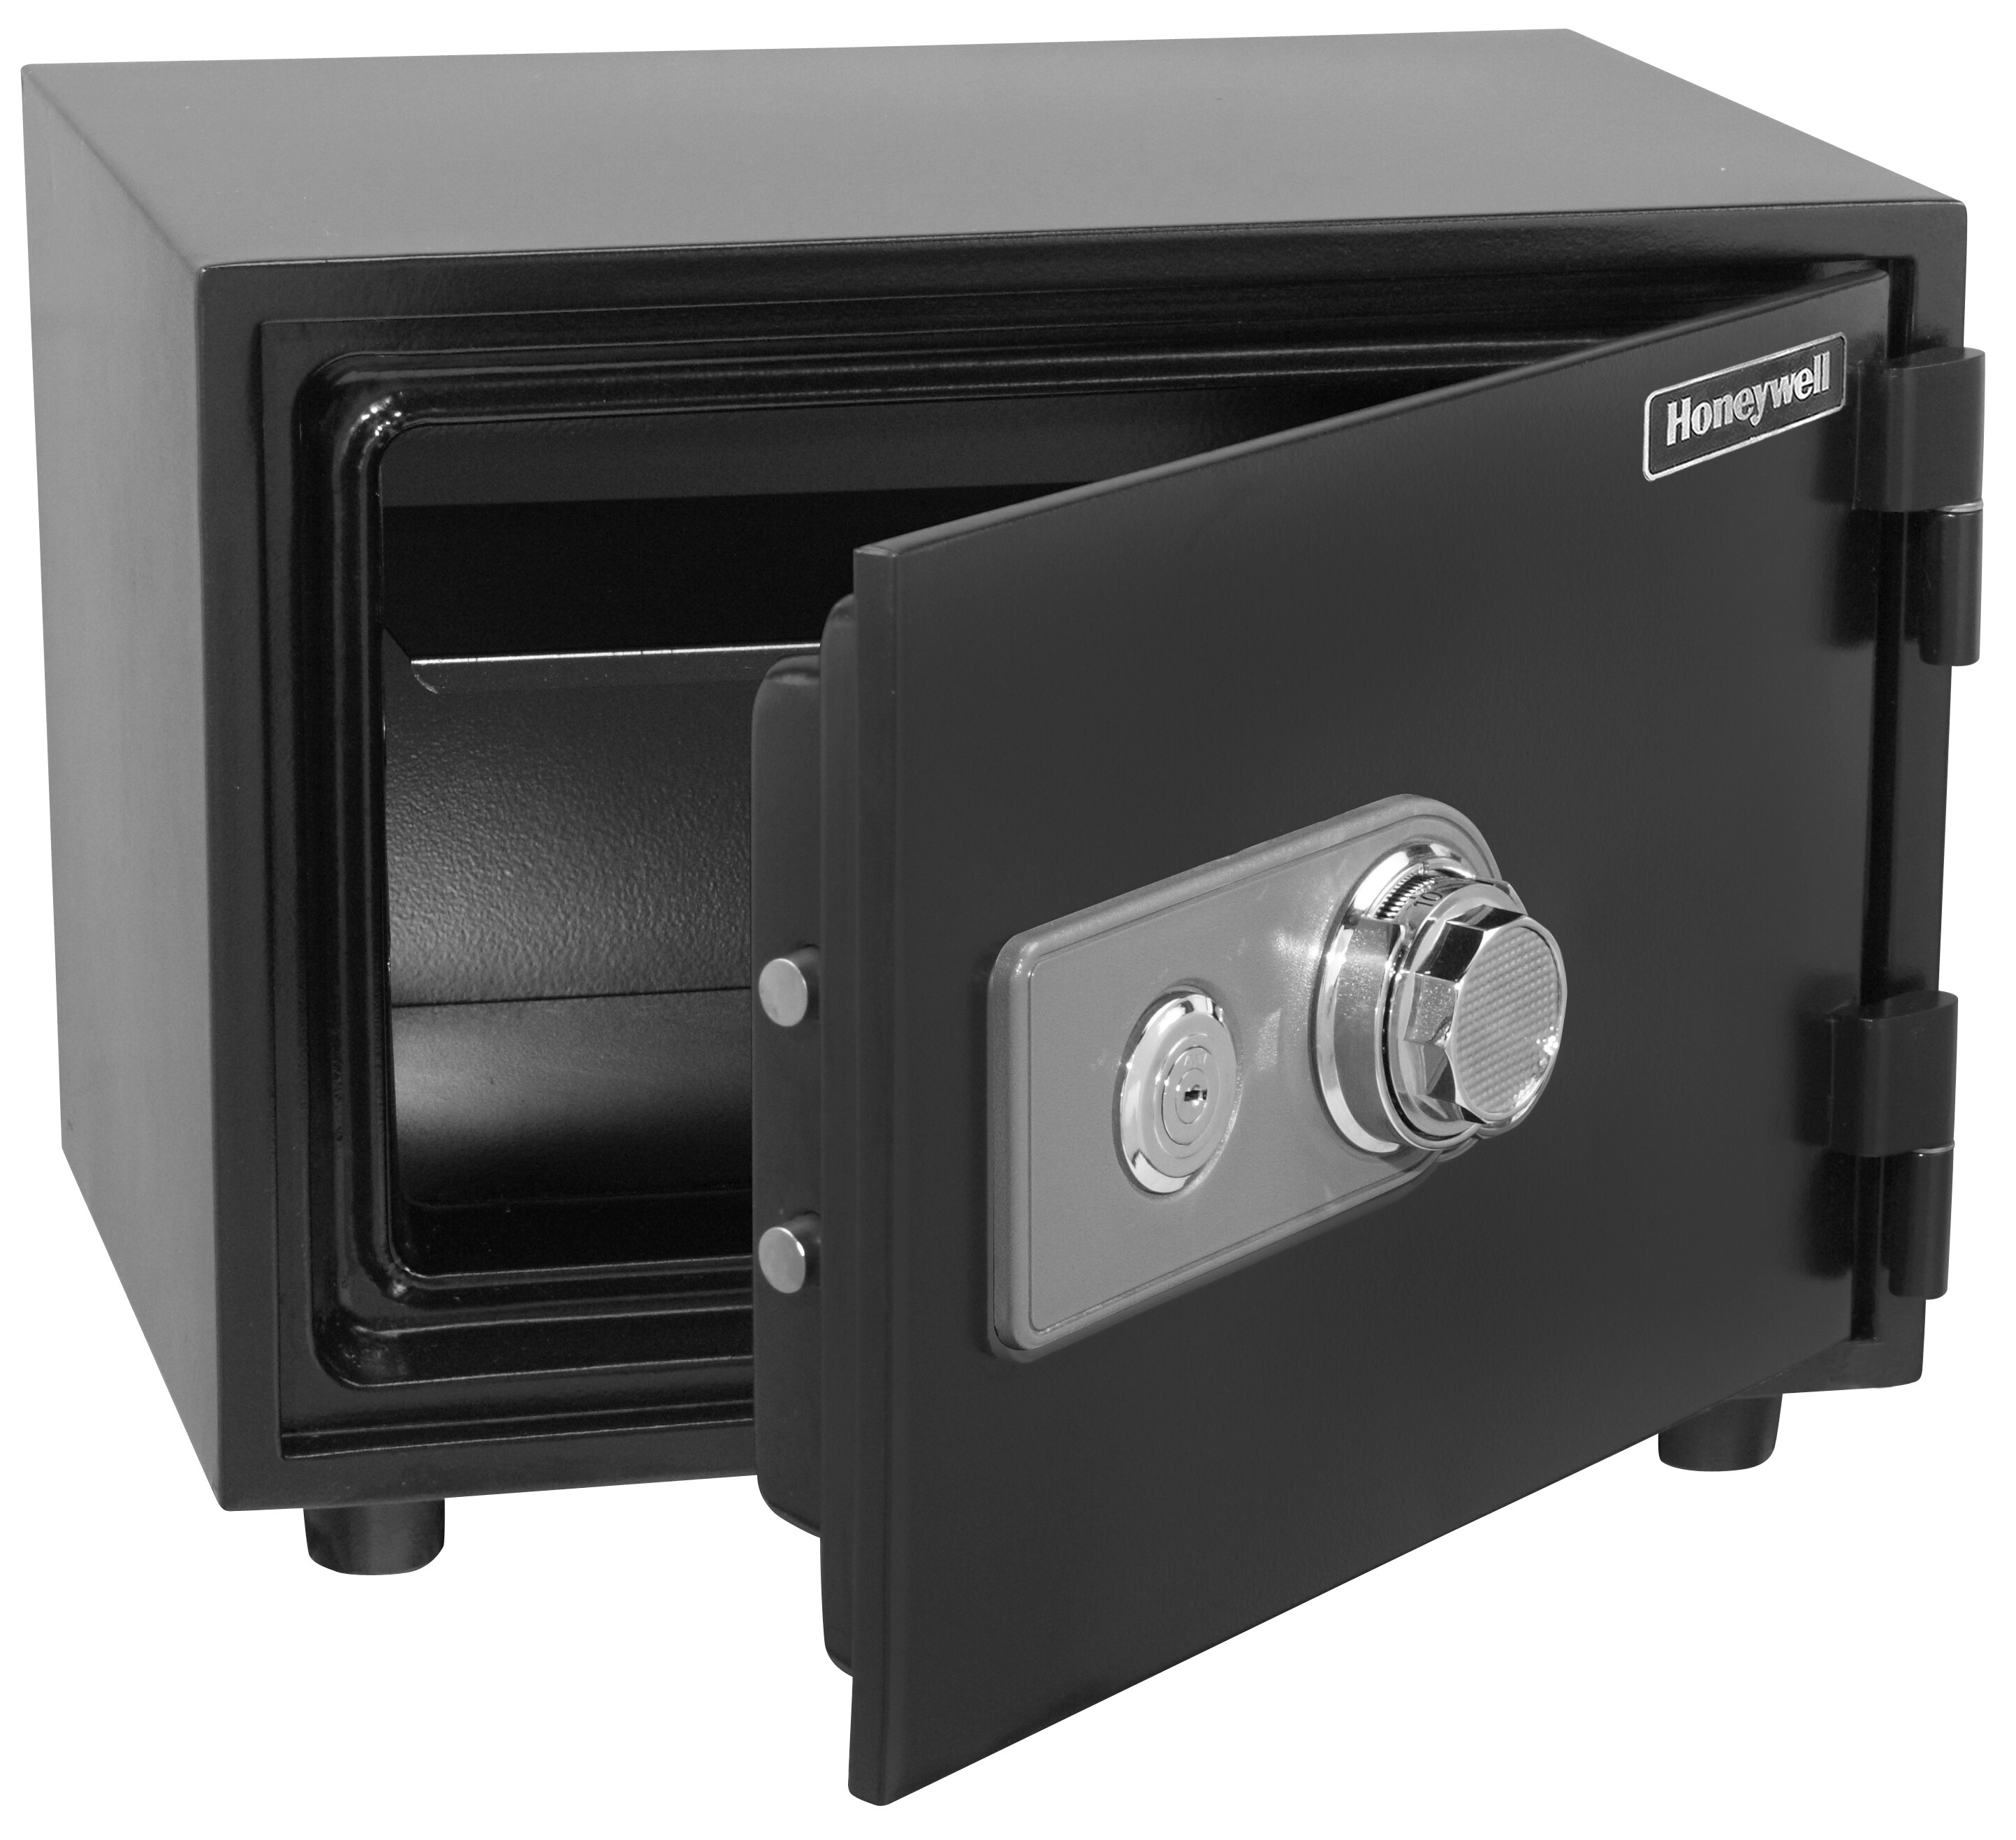 Honeywell 0.61-cu ft Fireproof Hotel/Residential Safe Box with Keyed Lock